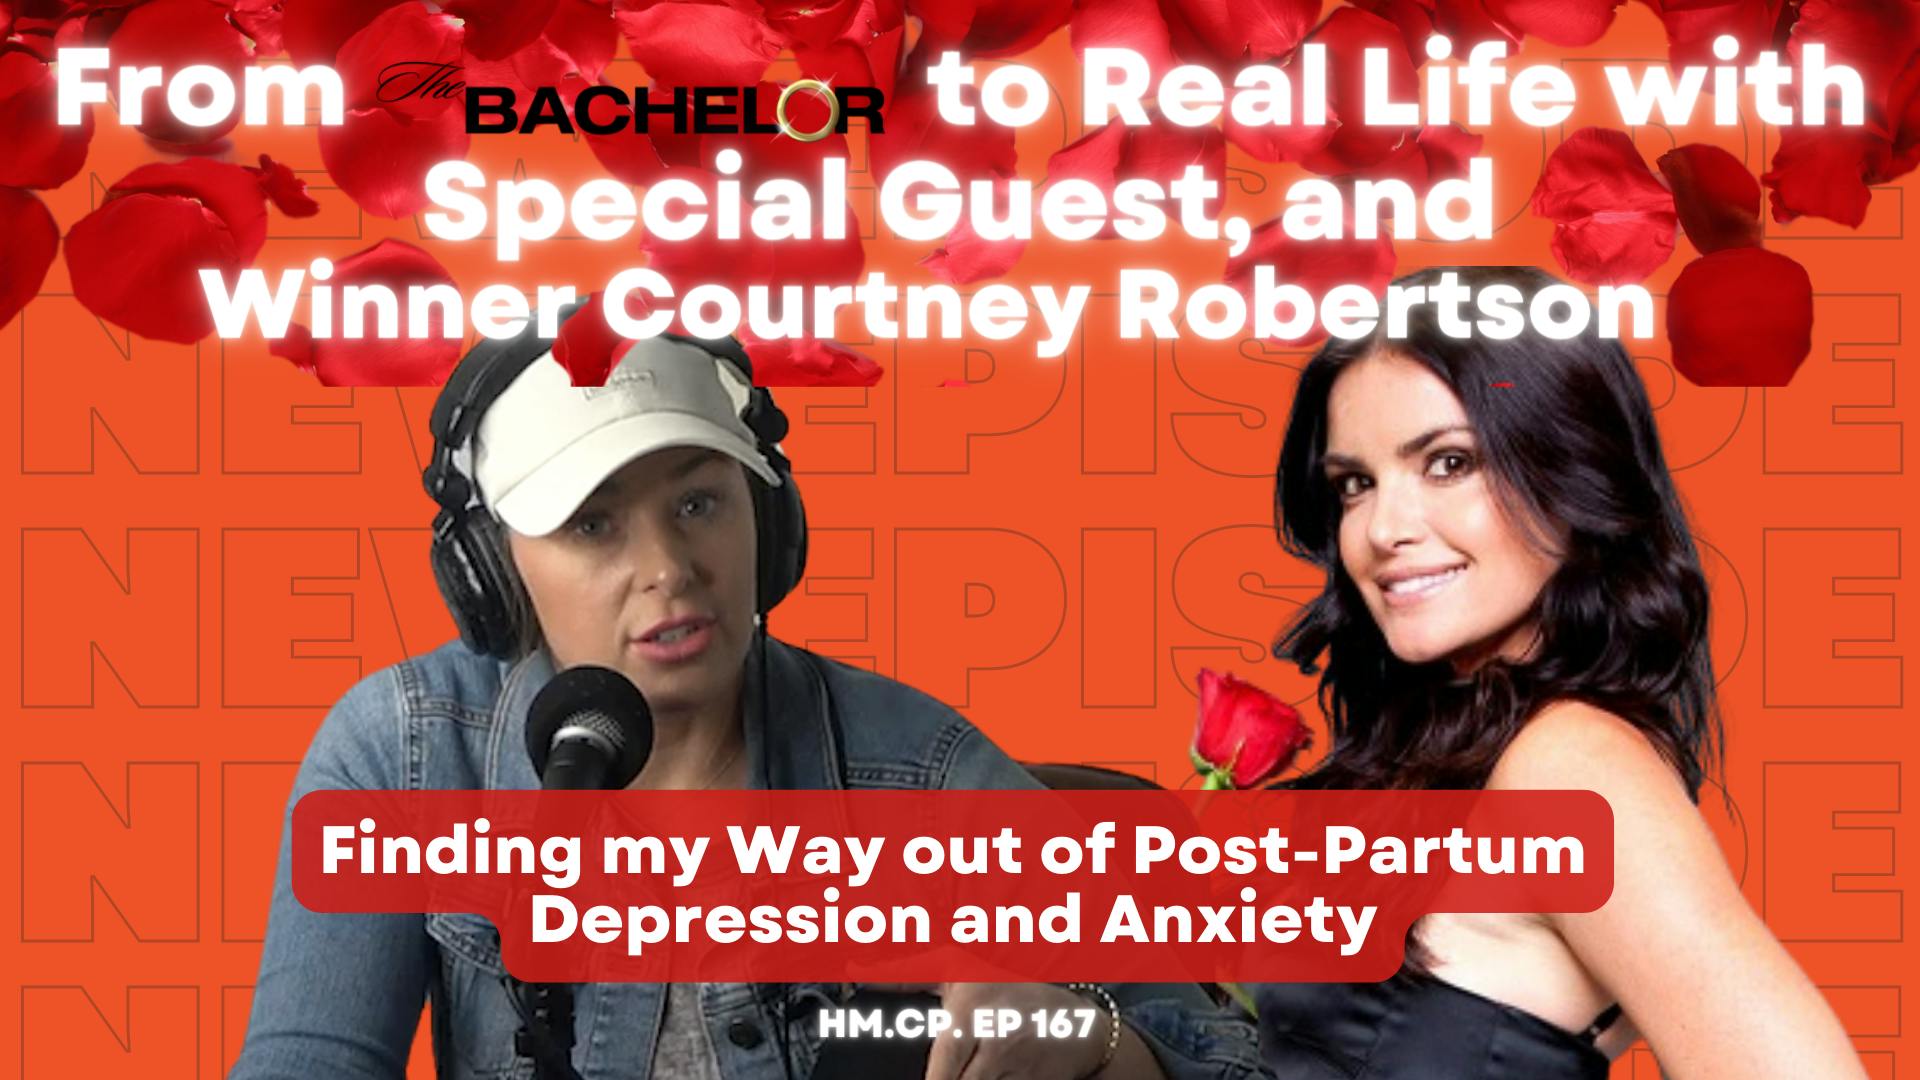 Ep 167 Finding my Way out of Post-Partum Depression and Anxiety & Revisiting my Season of the Bachelor with Winner Courtney Robertson